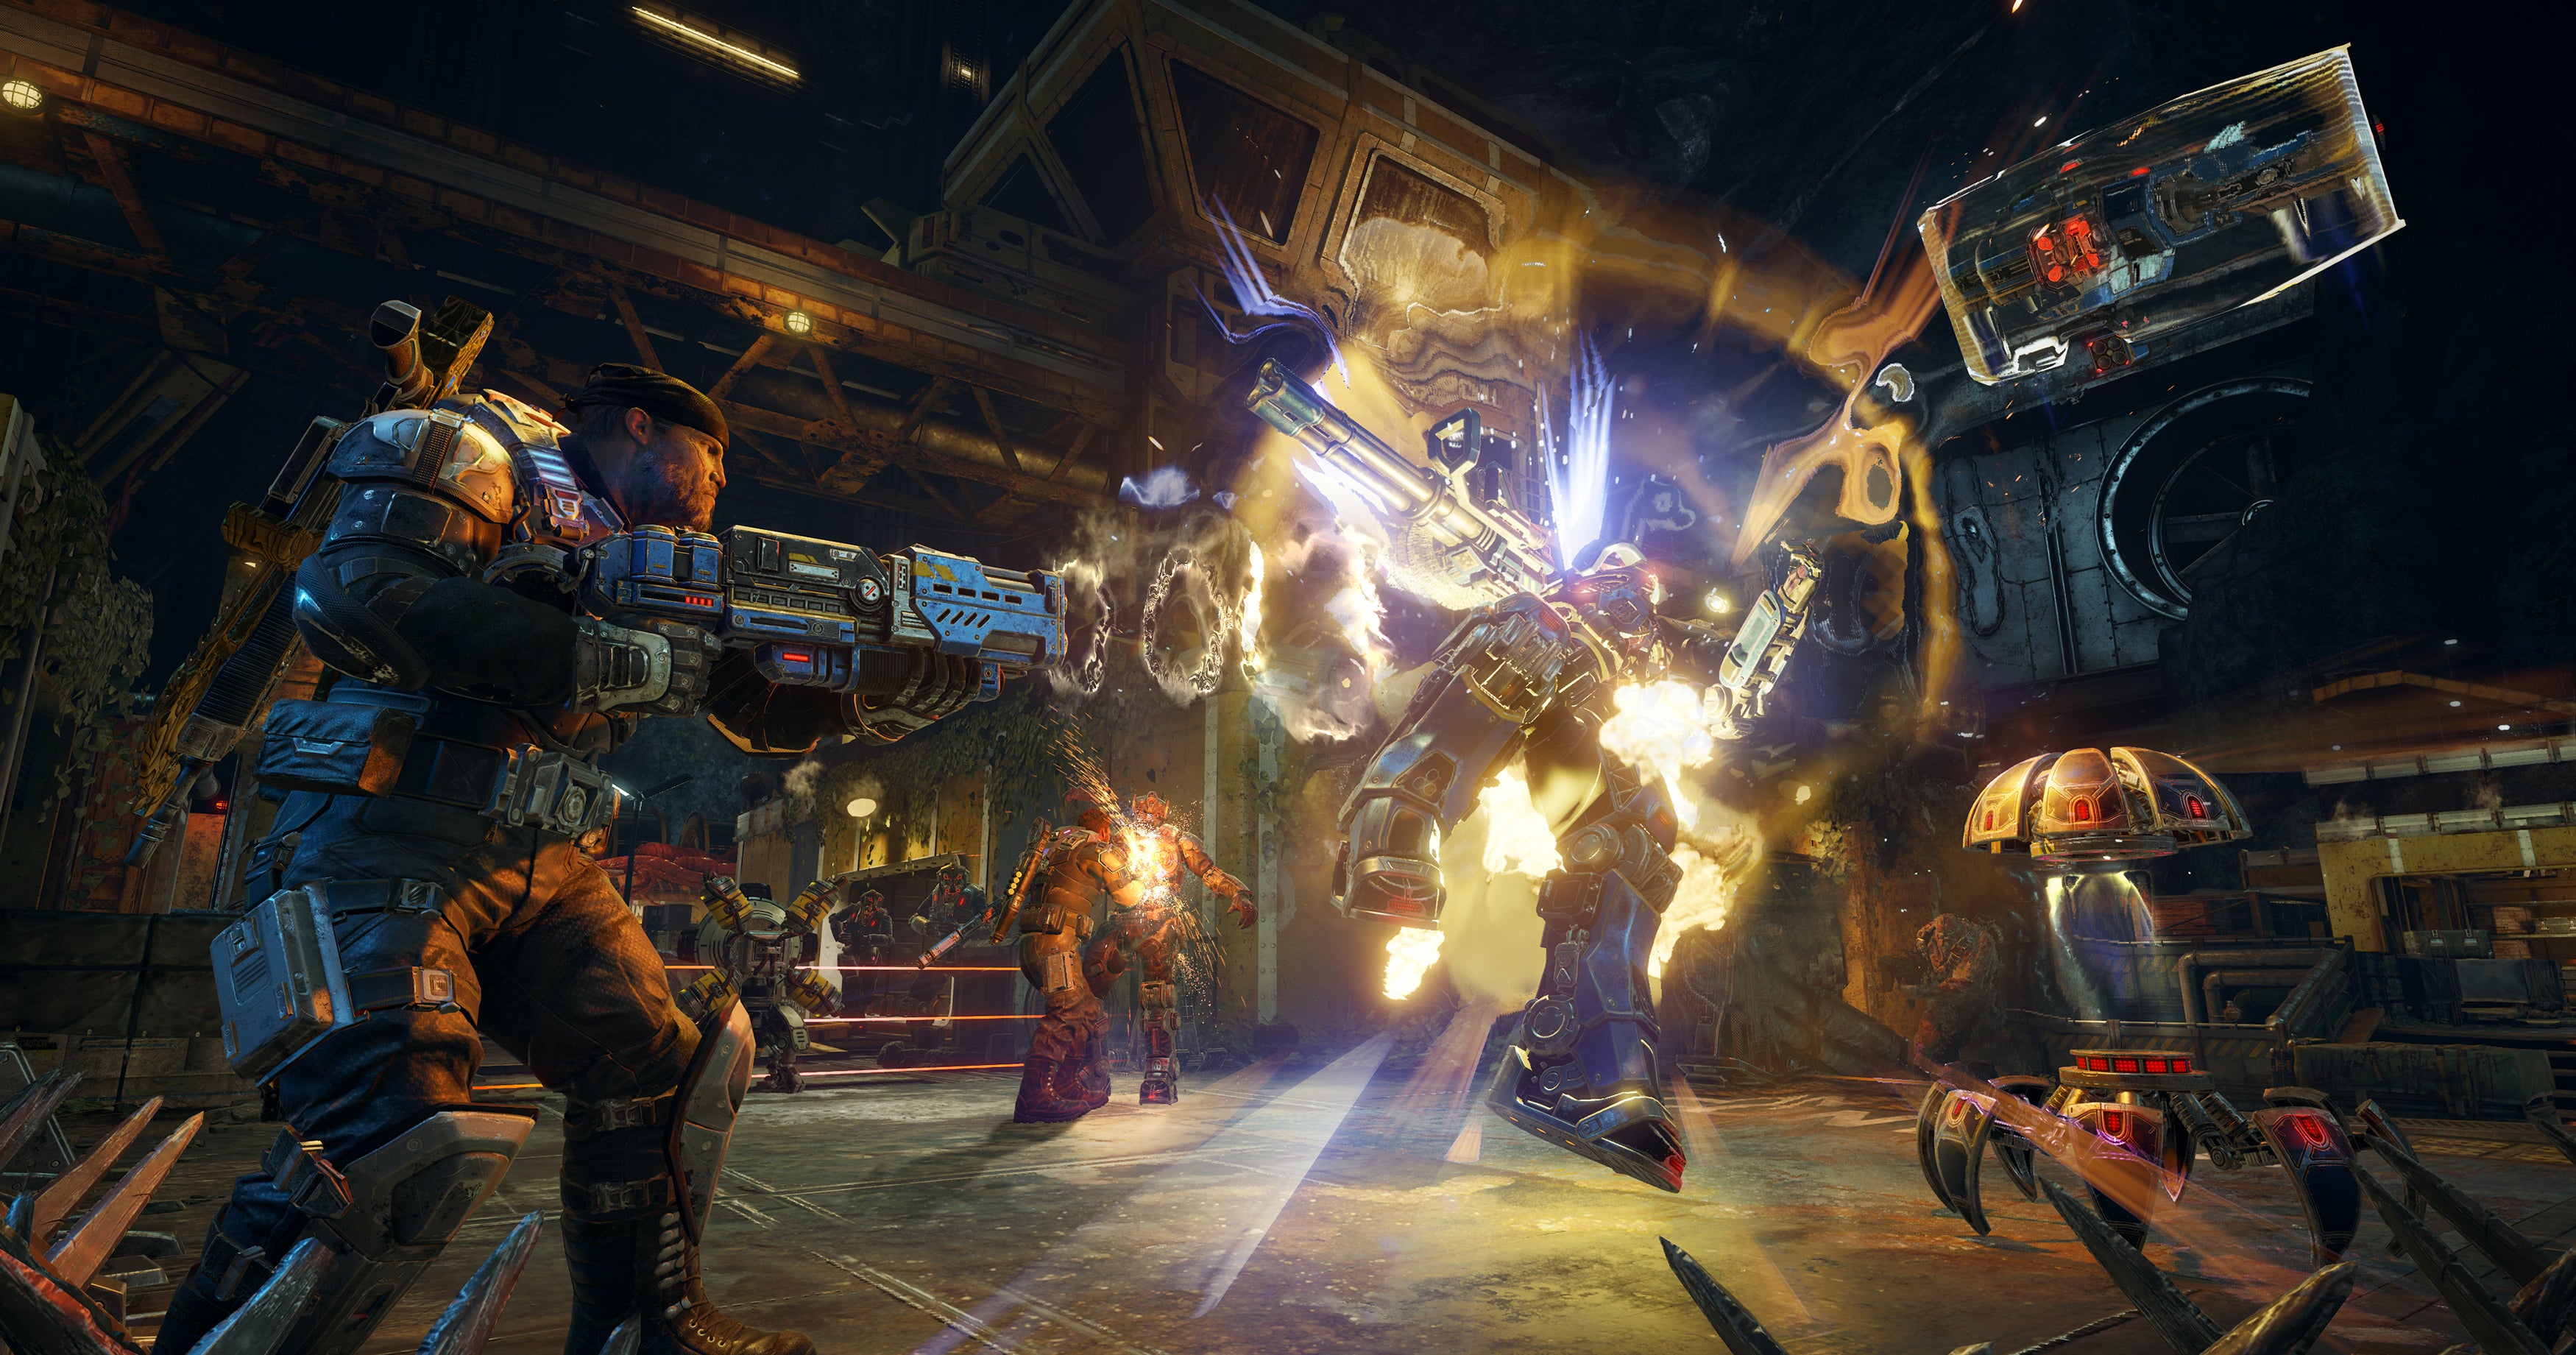 Image for Check out these Gears of War 4 screenshots showing off Horde 3.0